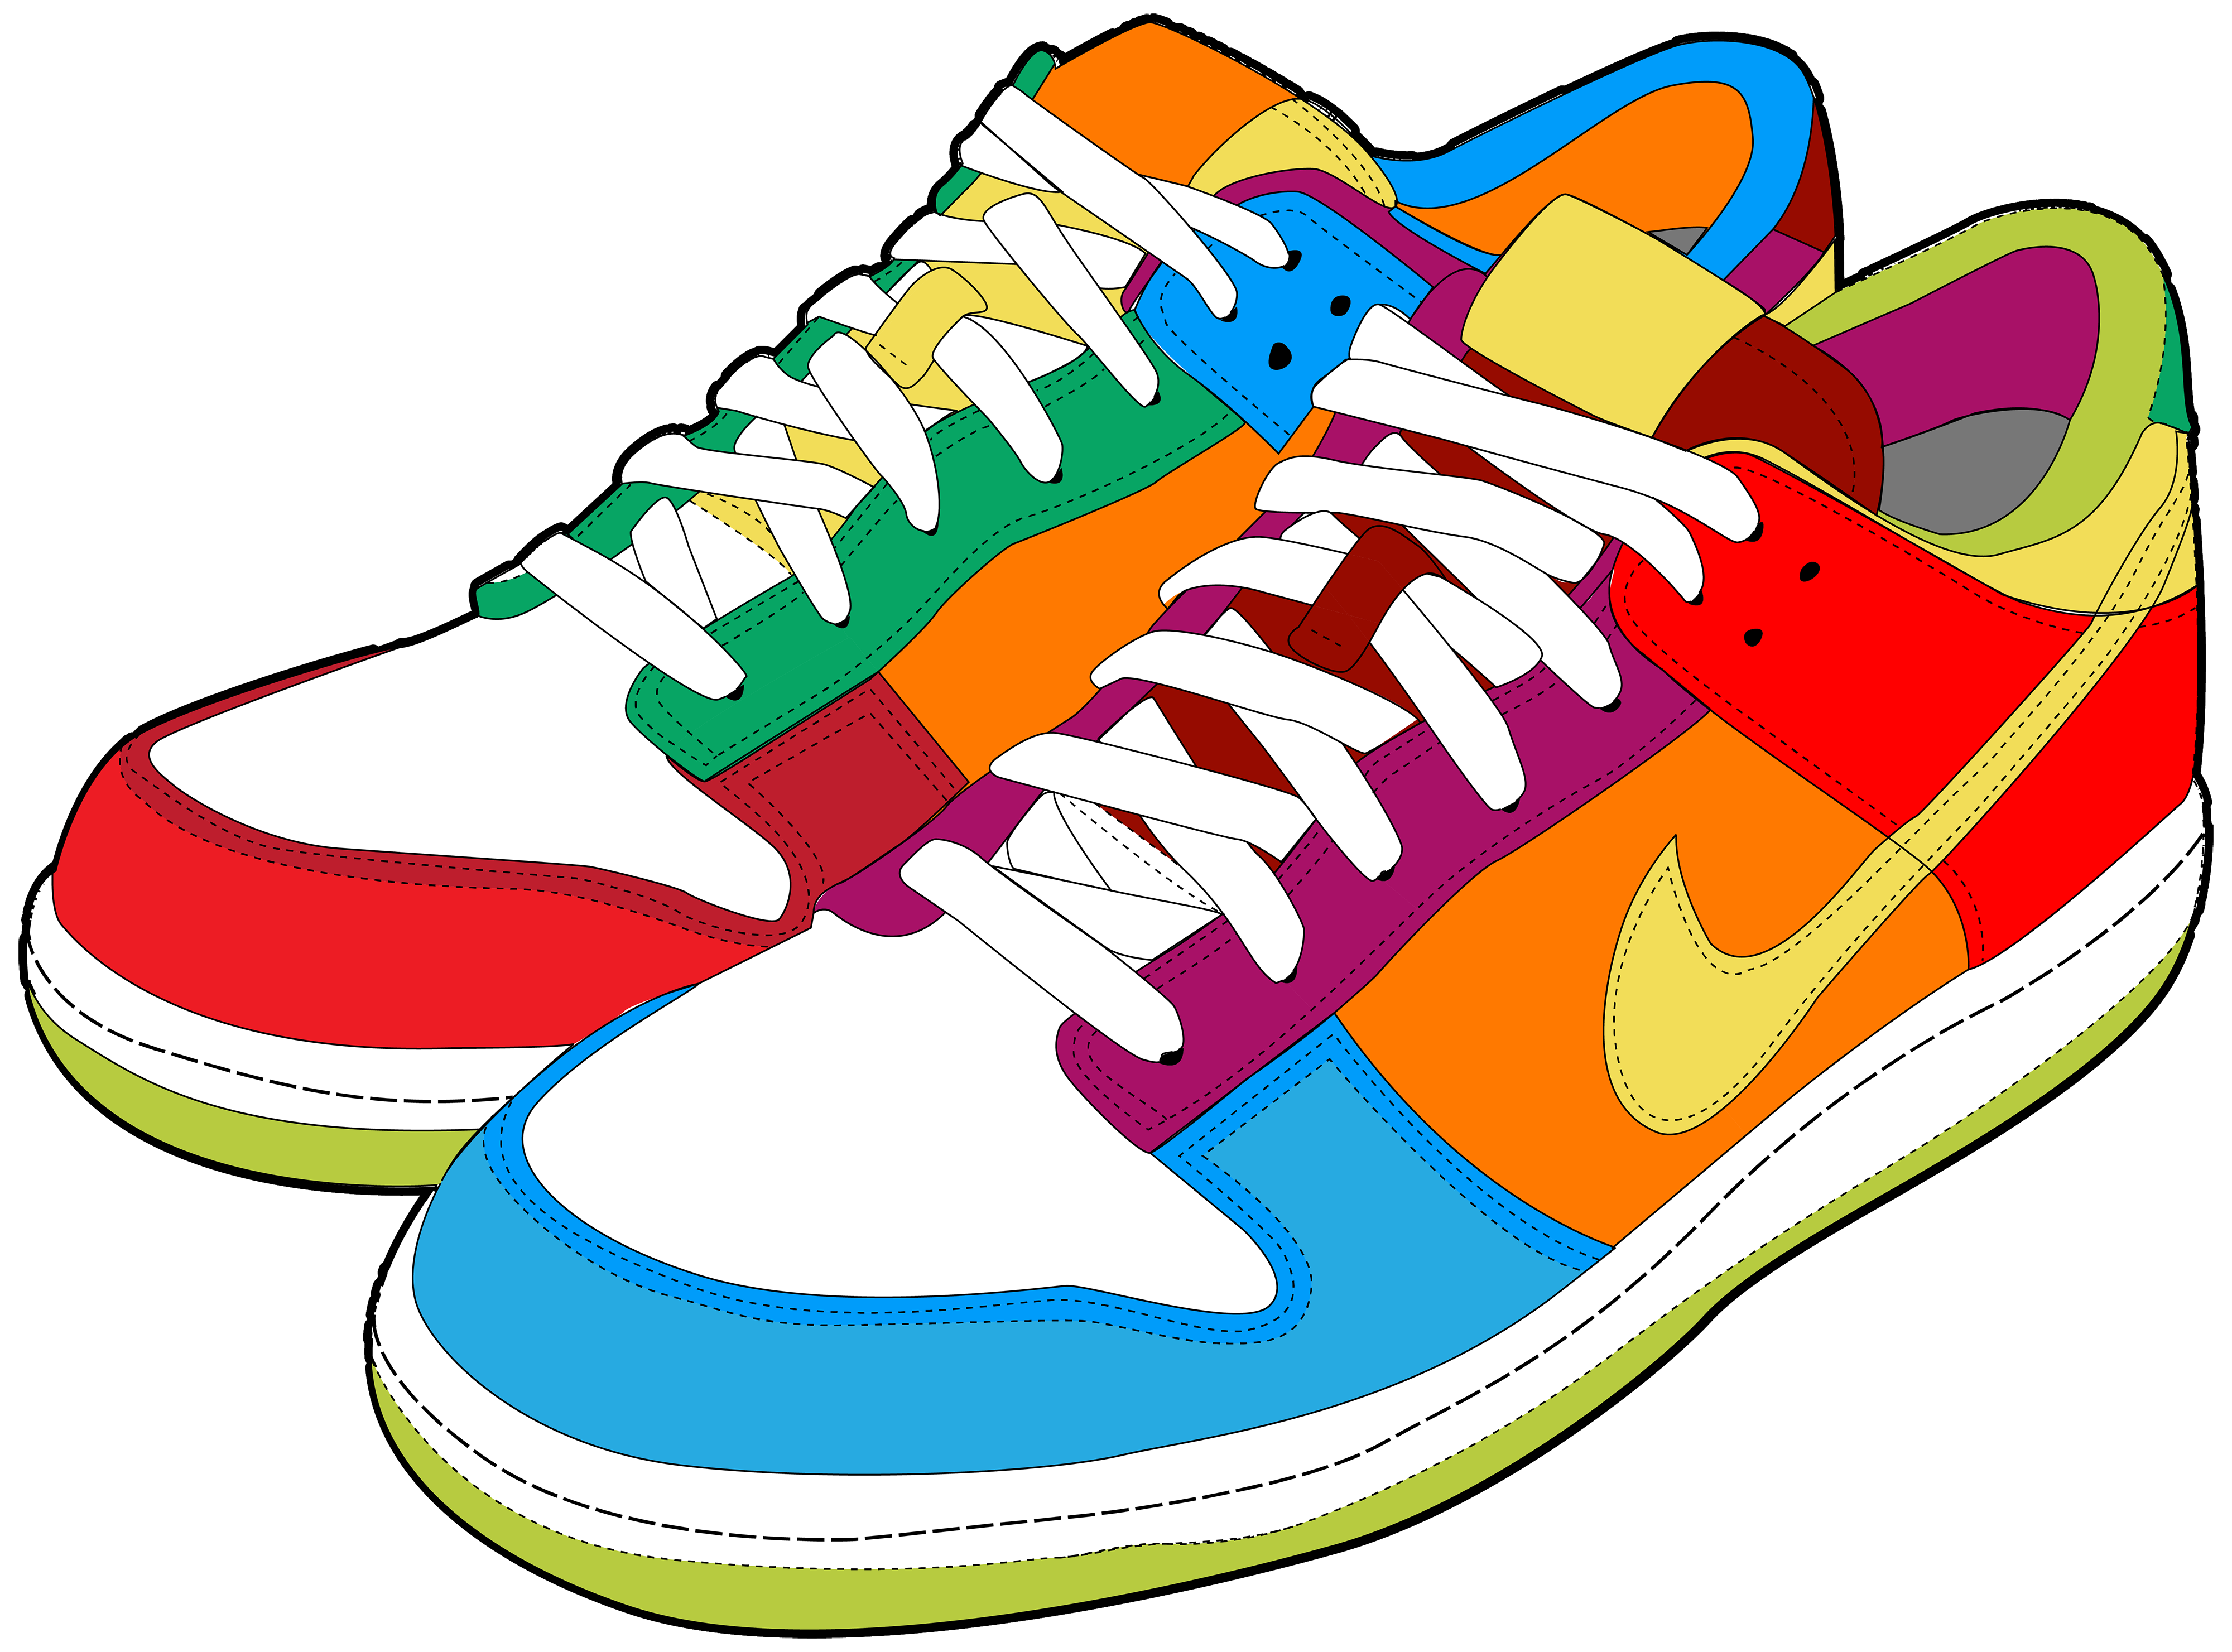 Colorful Sneakers PNG Clipart.